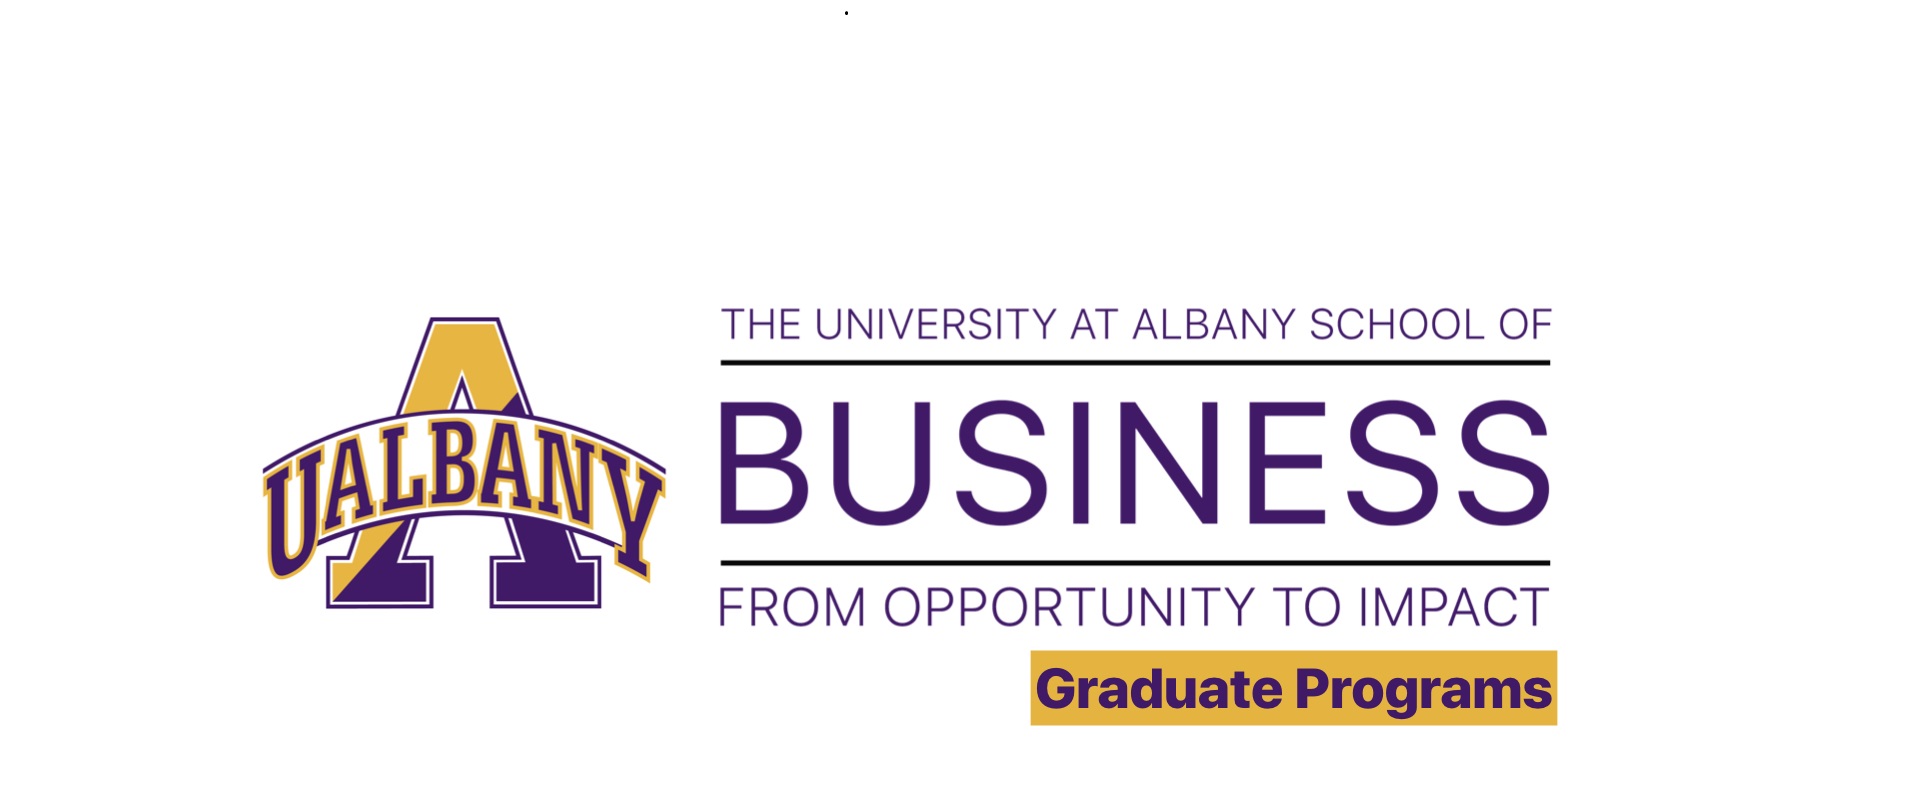 University at Albany School of Business